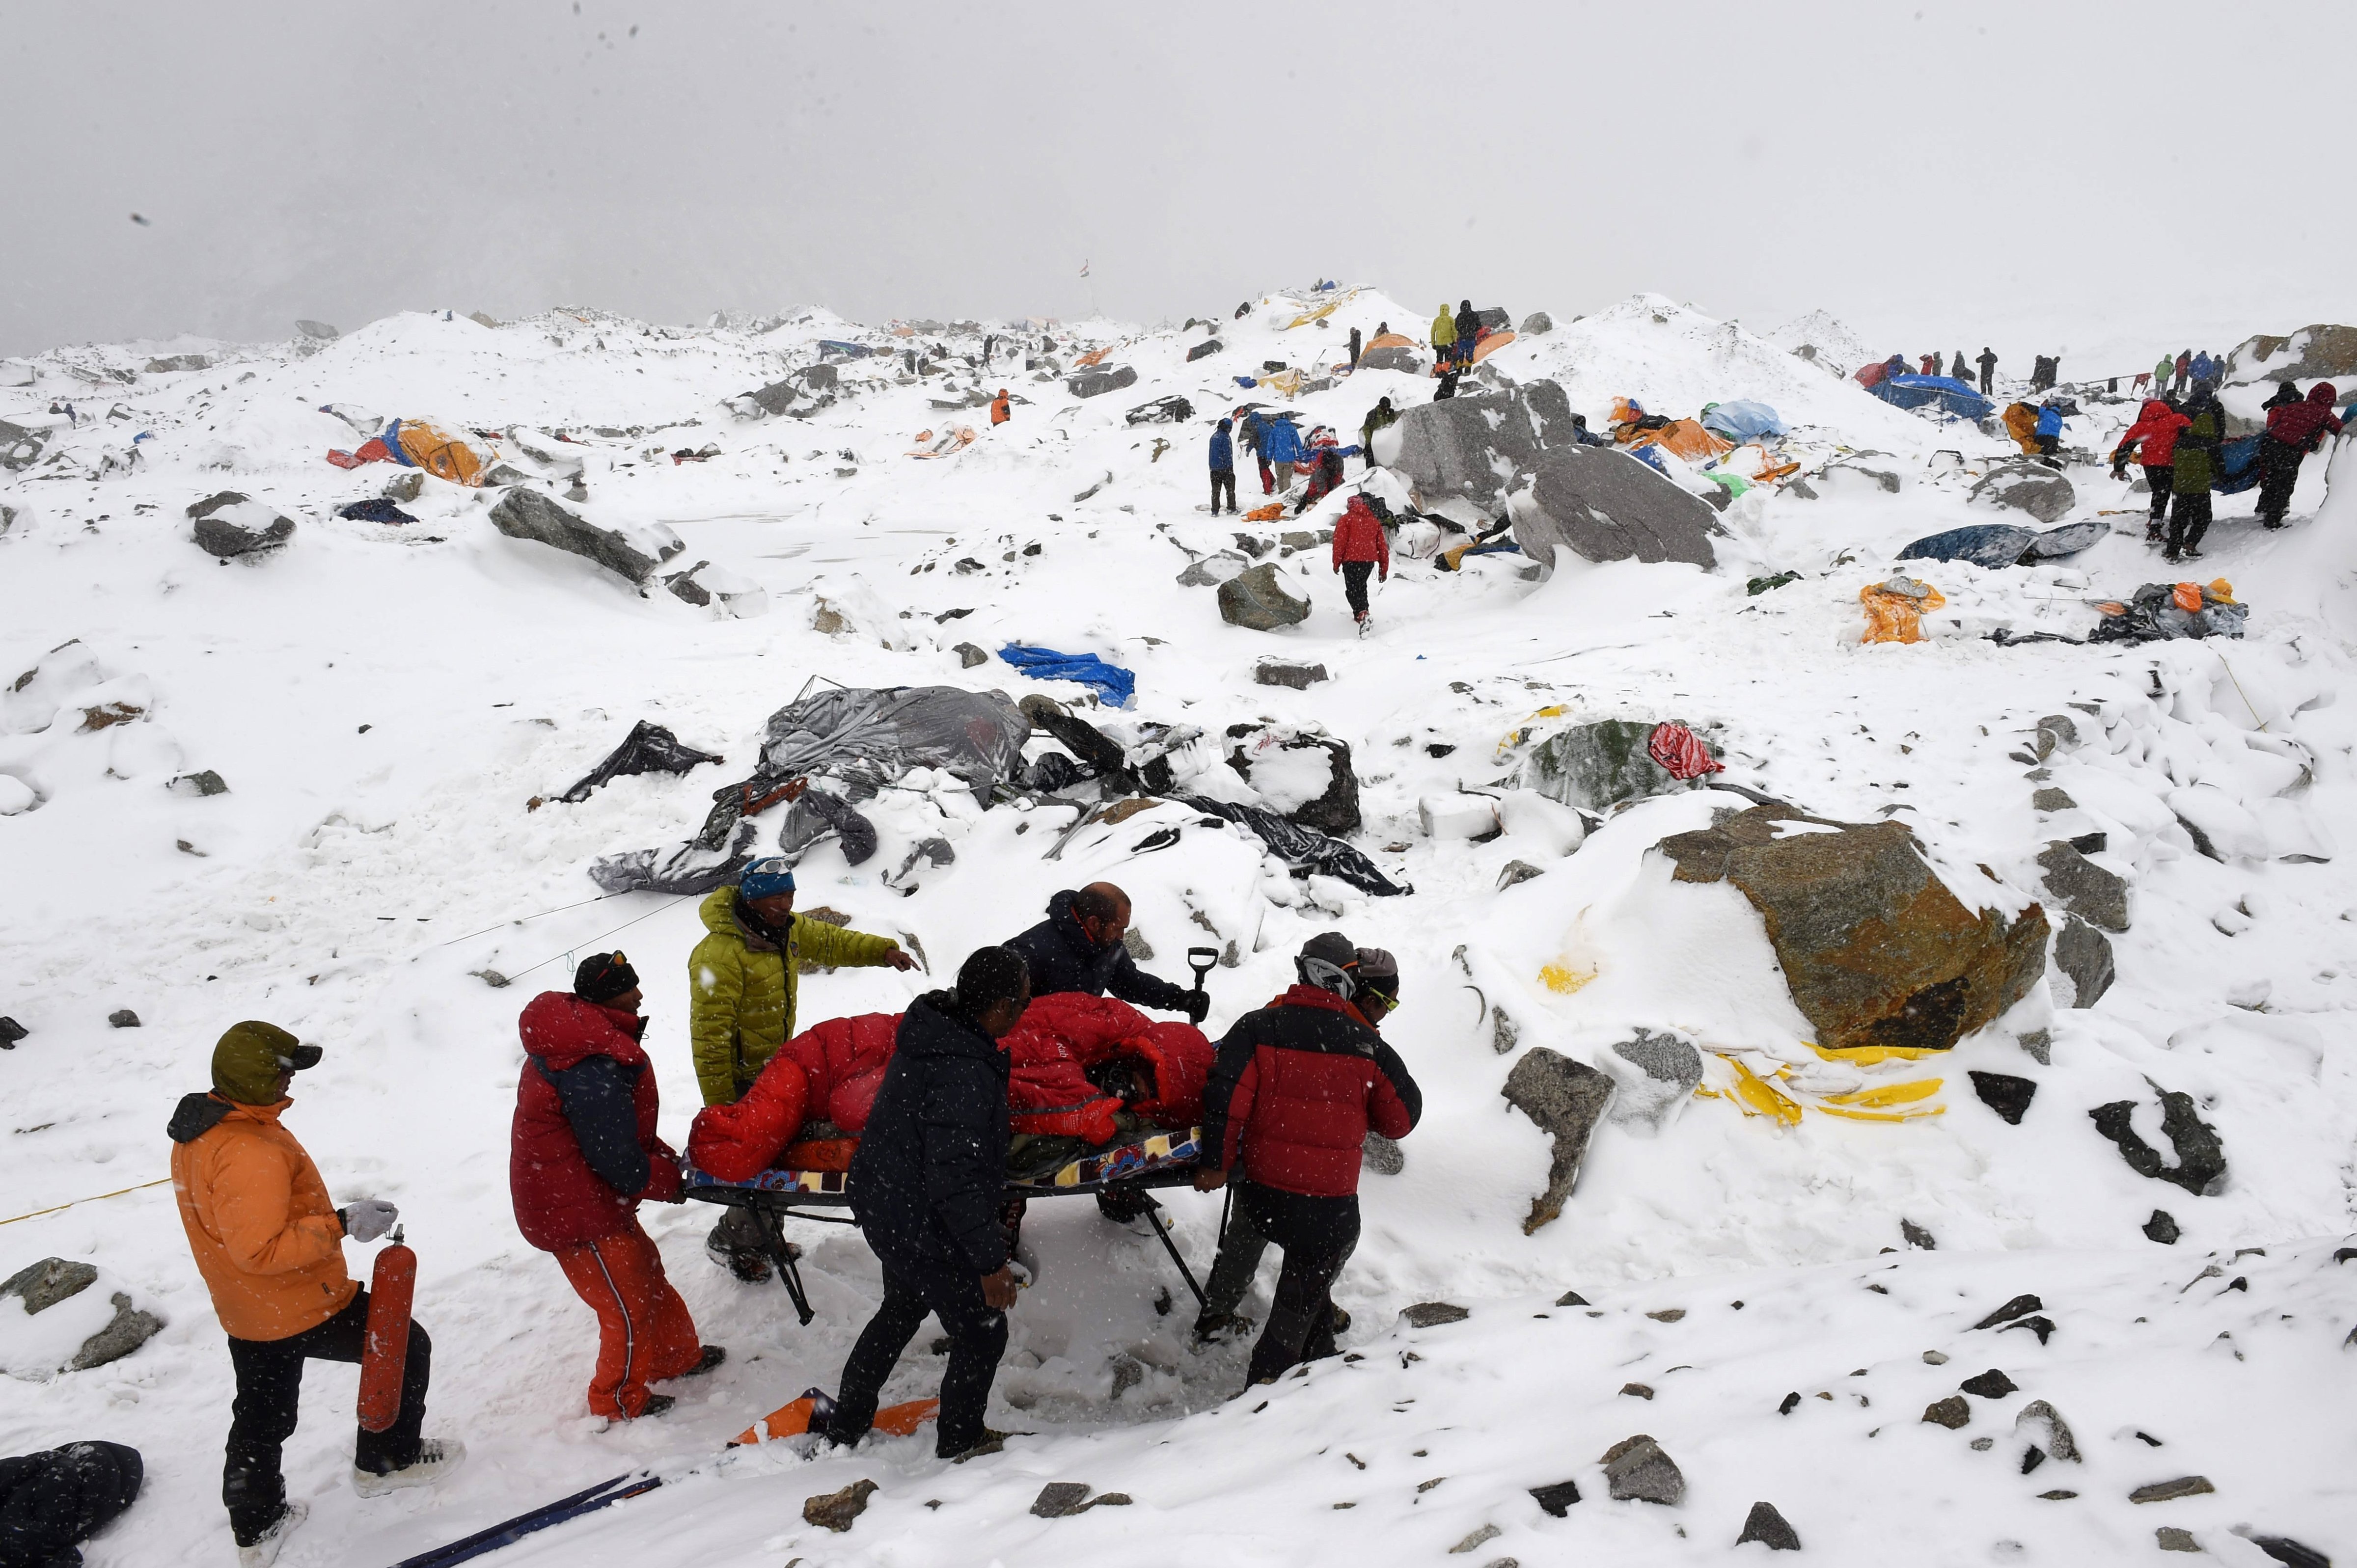 In this photograph taken on April 25, 2015, rescuers use a makeshift stretcher to carry an injured person after an avalanche triggered by an earthquake flattened parts of Everest Base Camp.   Rescuers in Nepal are searching frantically for survivors of a huge quake on April 25, that killed nearly 2,000, digging through rubble in the devastated capital Kathmandu and airlifting victims of an avalanche at Everest base camp. (Roberto Schmidt&mdash;AFP/Getty Images)